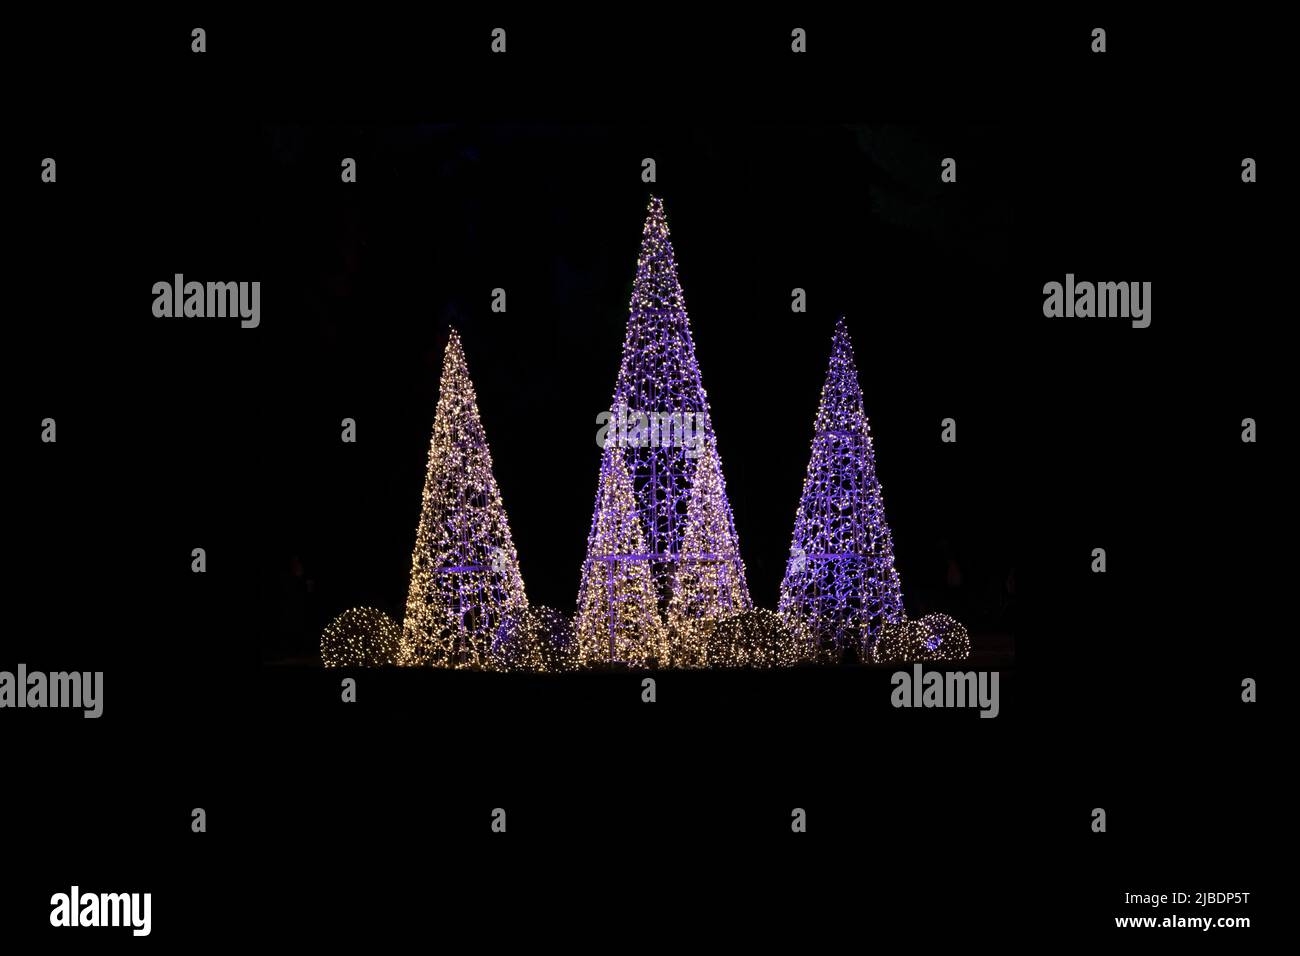 decorative christmas trees covered in colorful lights outside at night Stock Photo